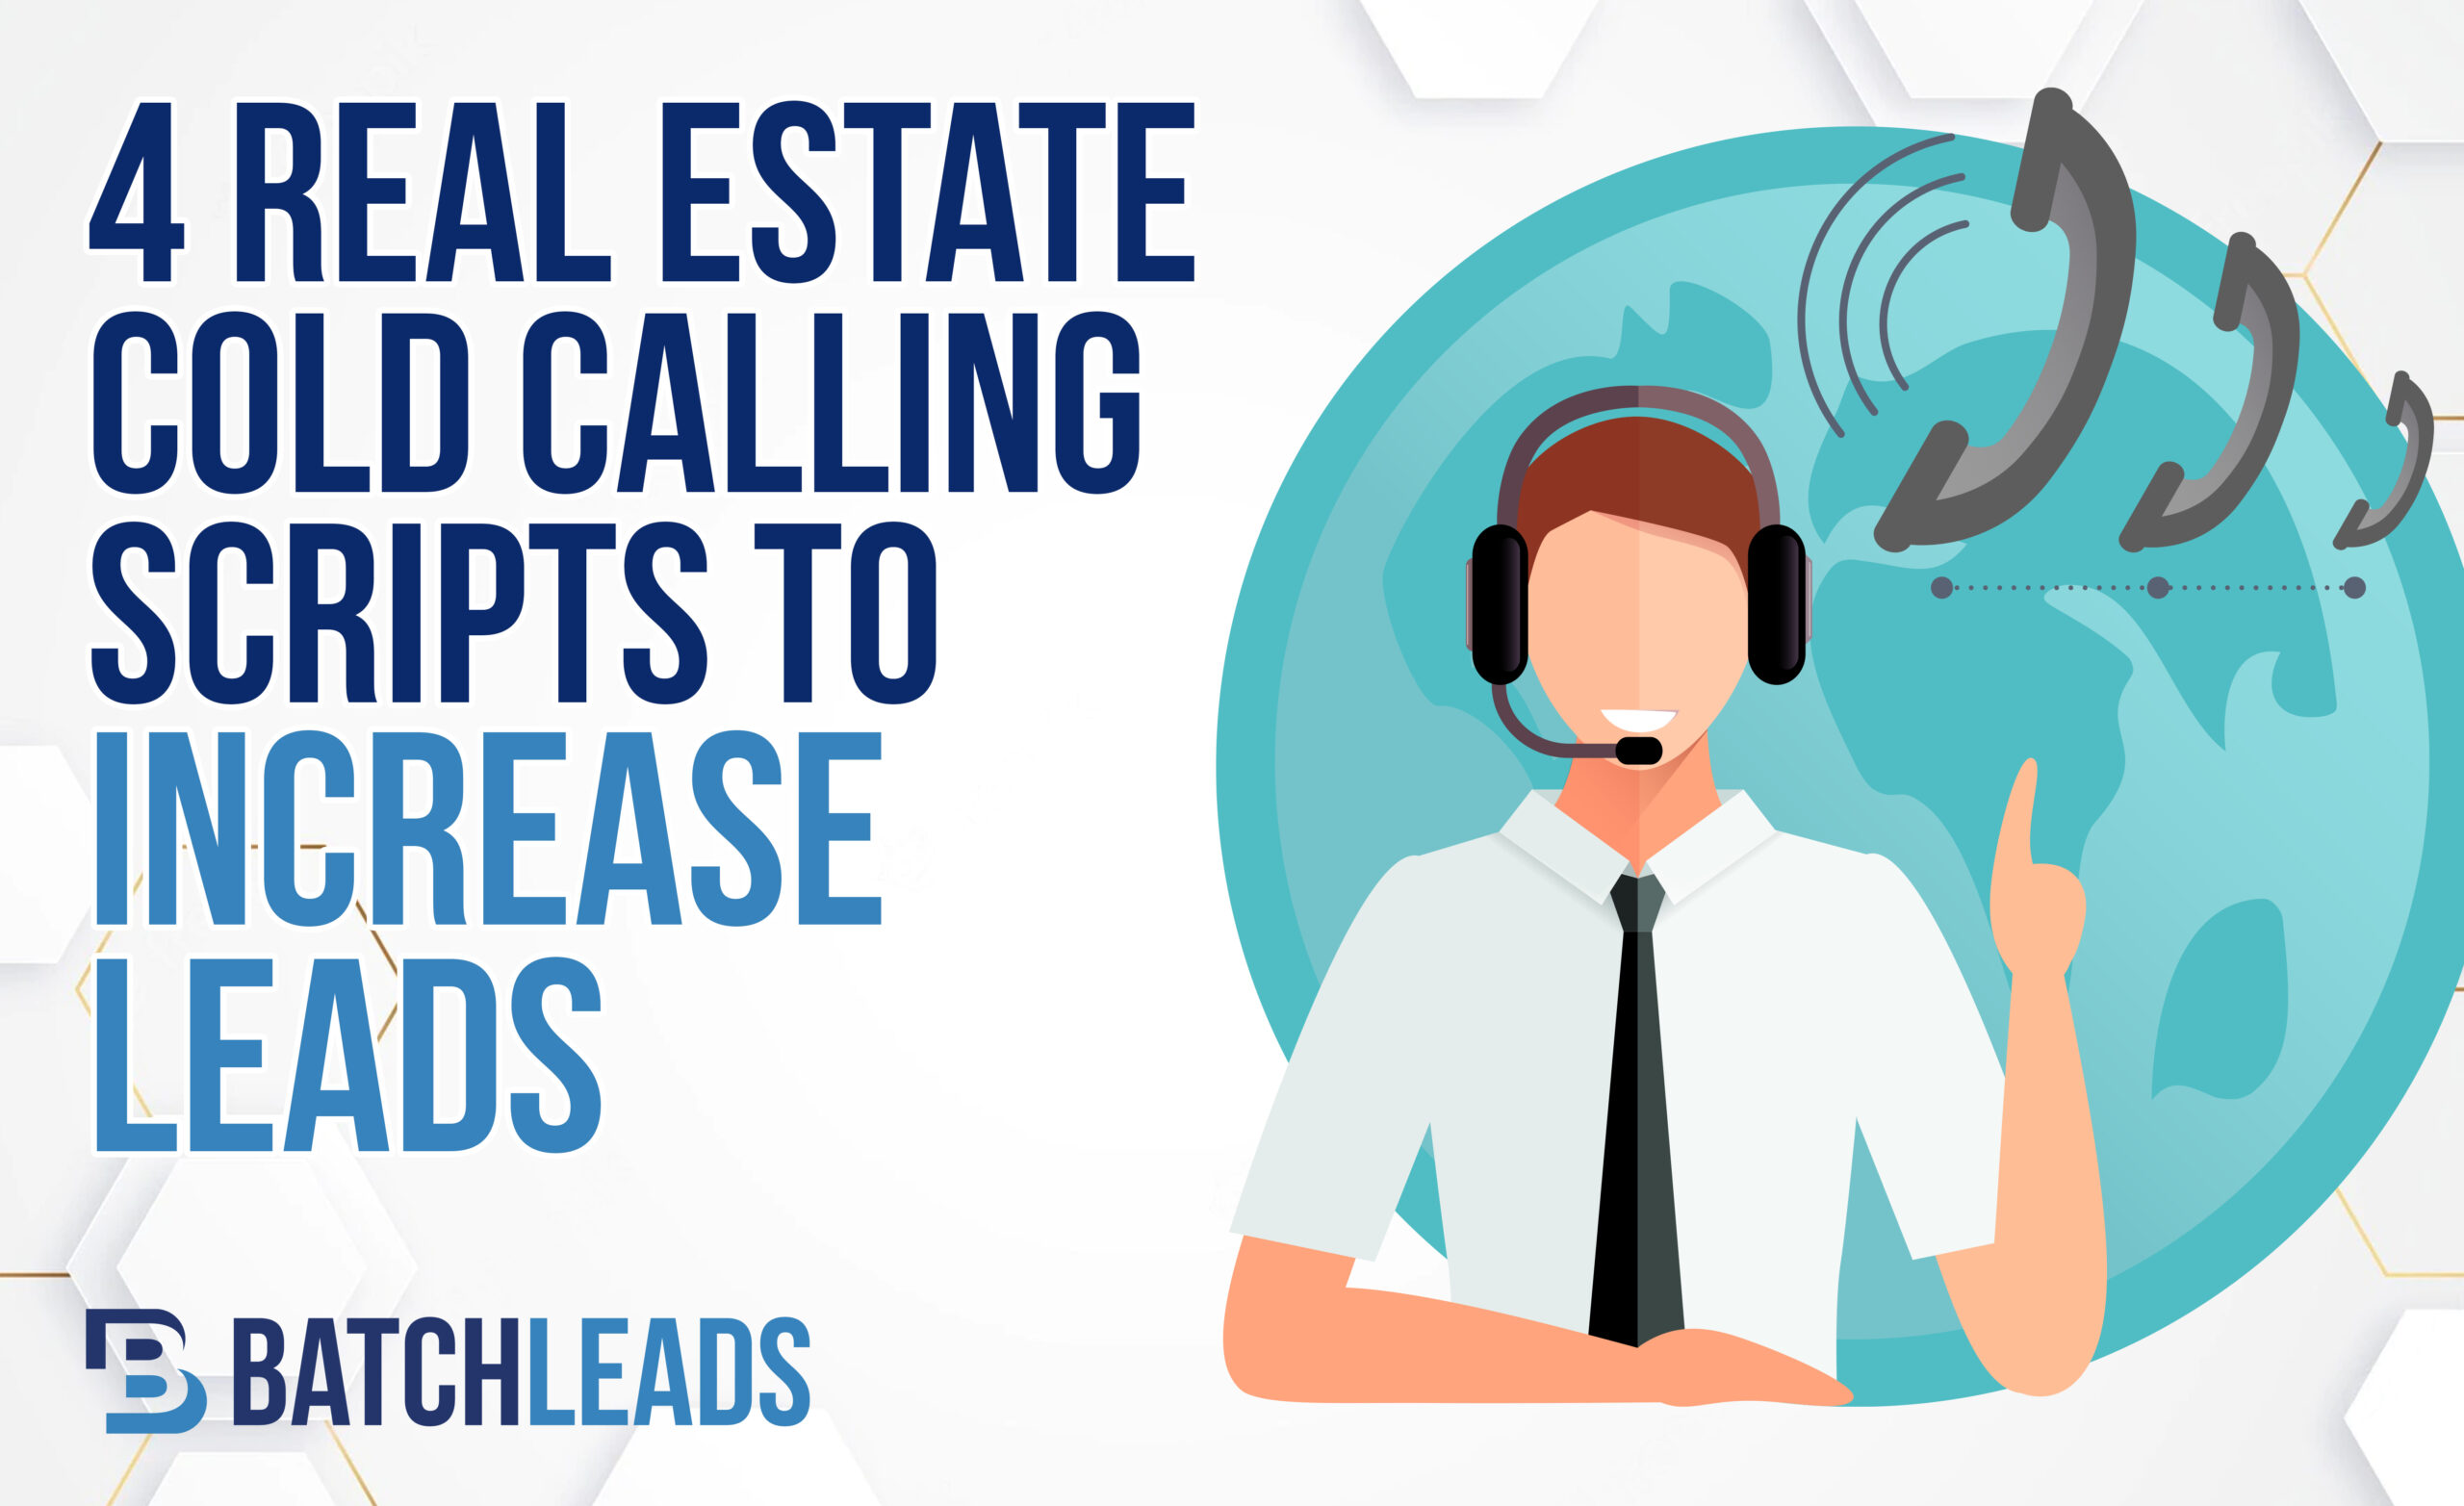 4 Real Estate Cold Calling Scripts to Increase Leads (1)